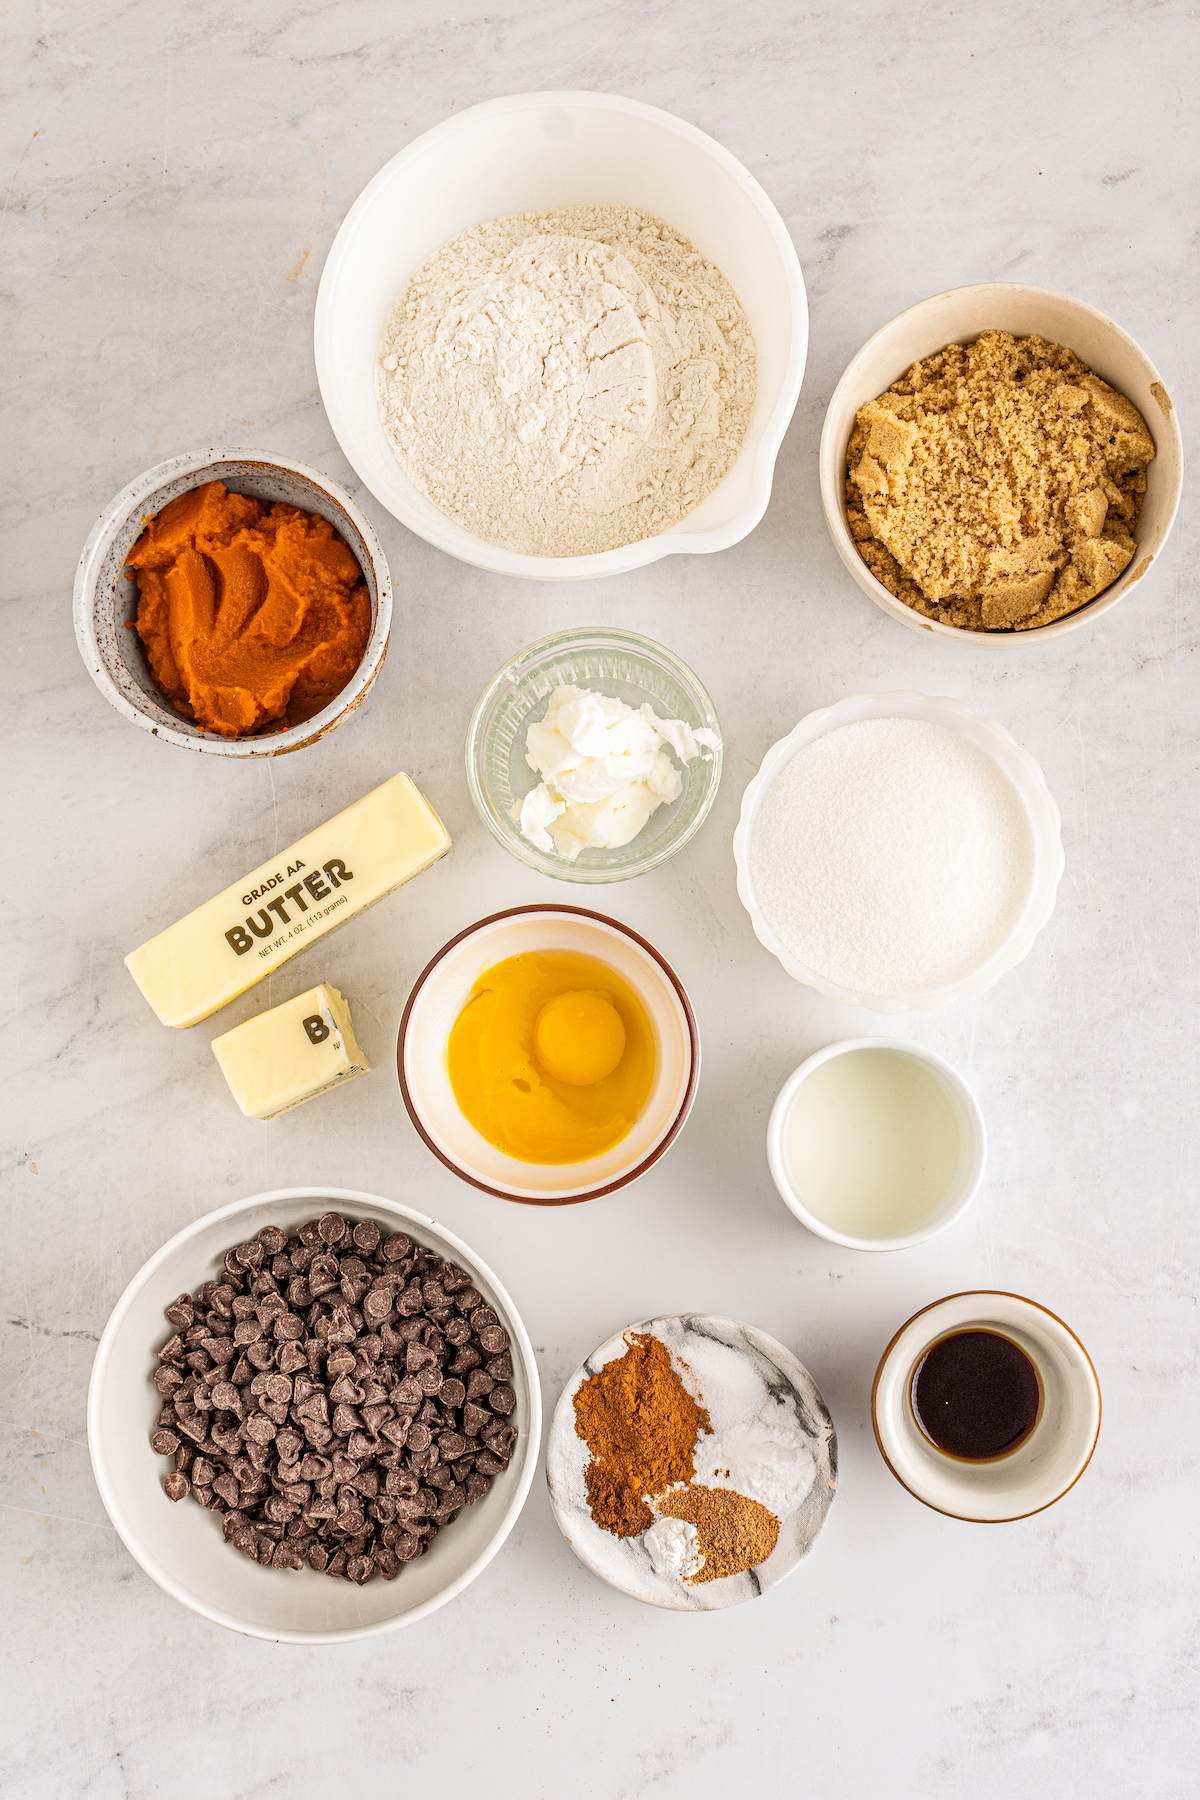 the ingredients needed to make pumpkin chocolate chip cookies like butter, pureed pumpkin, flour, brown sugar, white sugar, eggs, spices, vanilla, and chocolate chips prepped and ready to be mixed